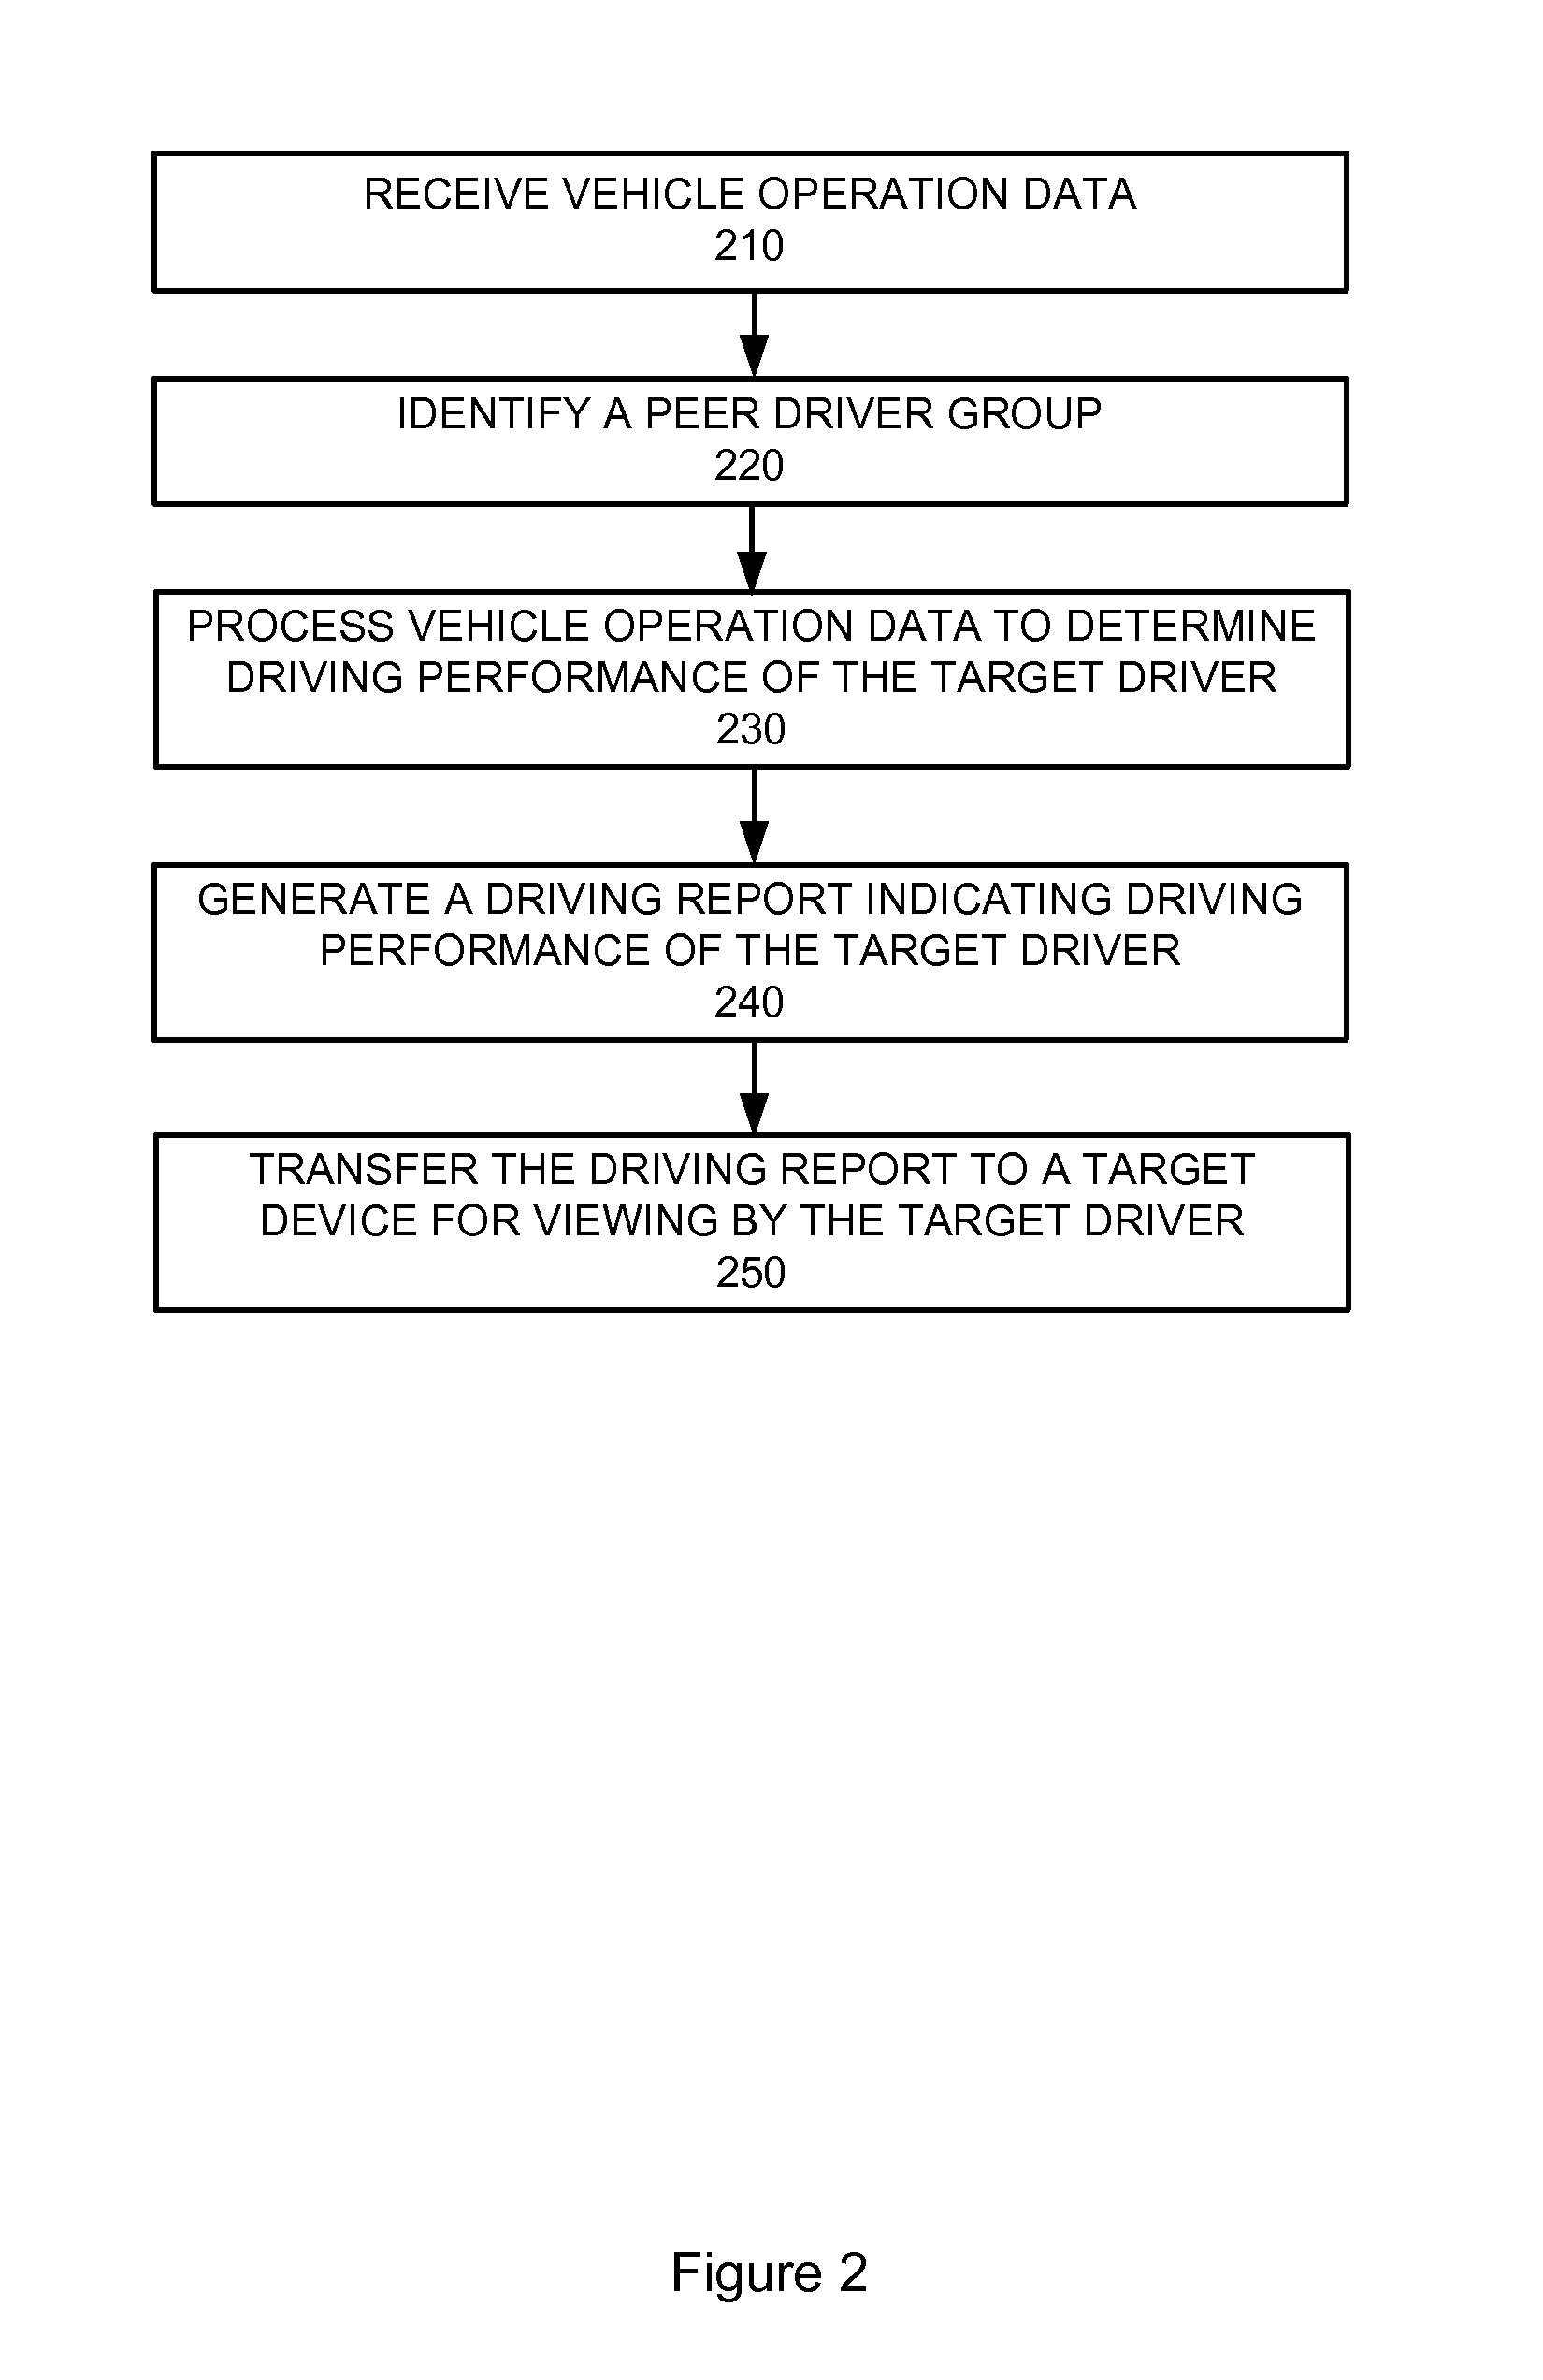 Systems and methods for vehicle performance analysis and presentation